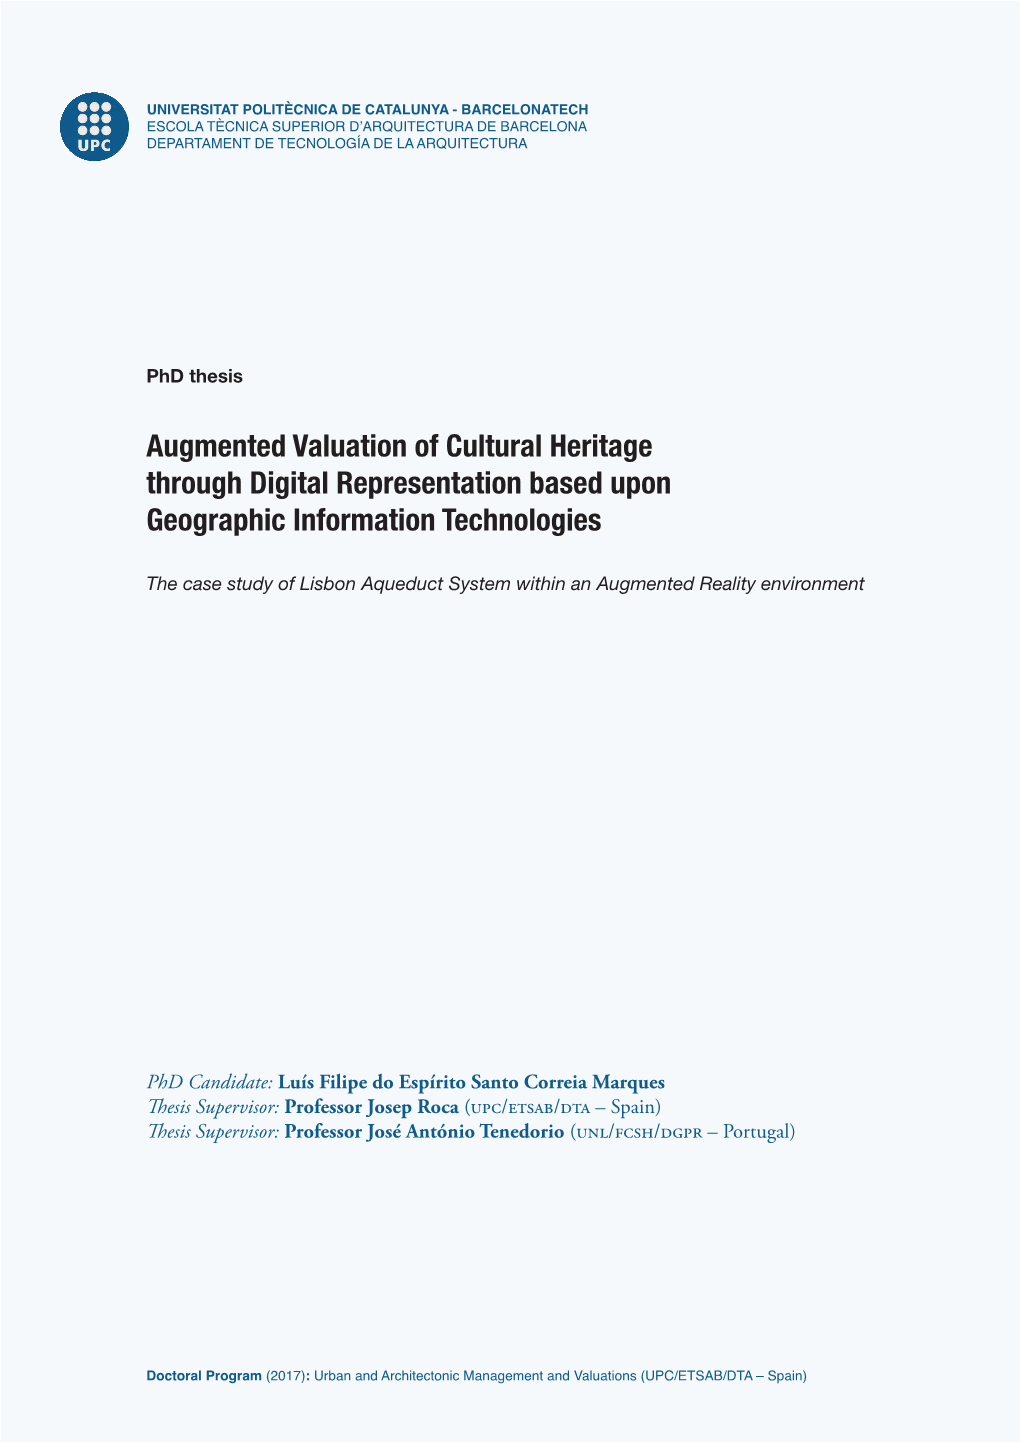 Augmented Valuation of Cultural Heritage Through Digital Representation Based Upon Geographic Information Technologies